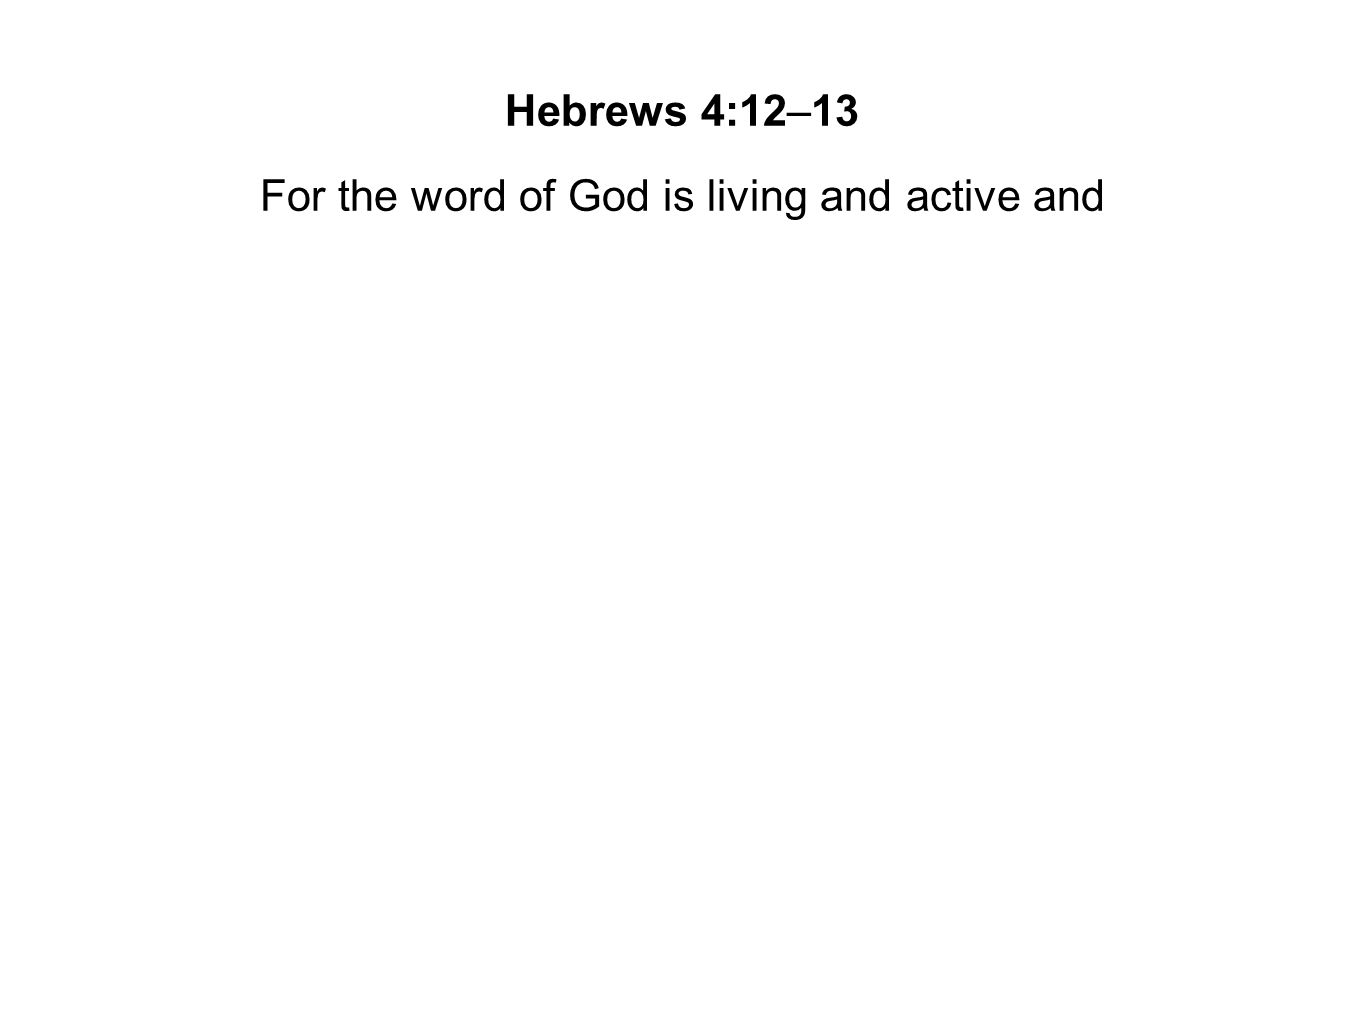 For the word of God is living and active and